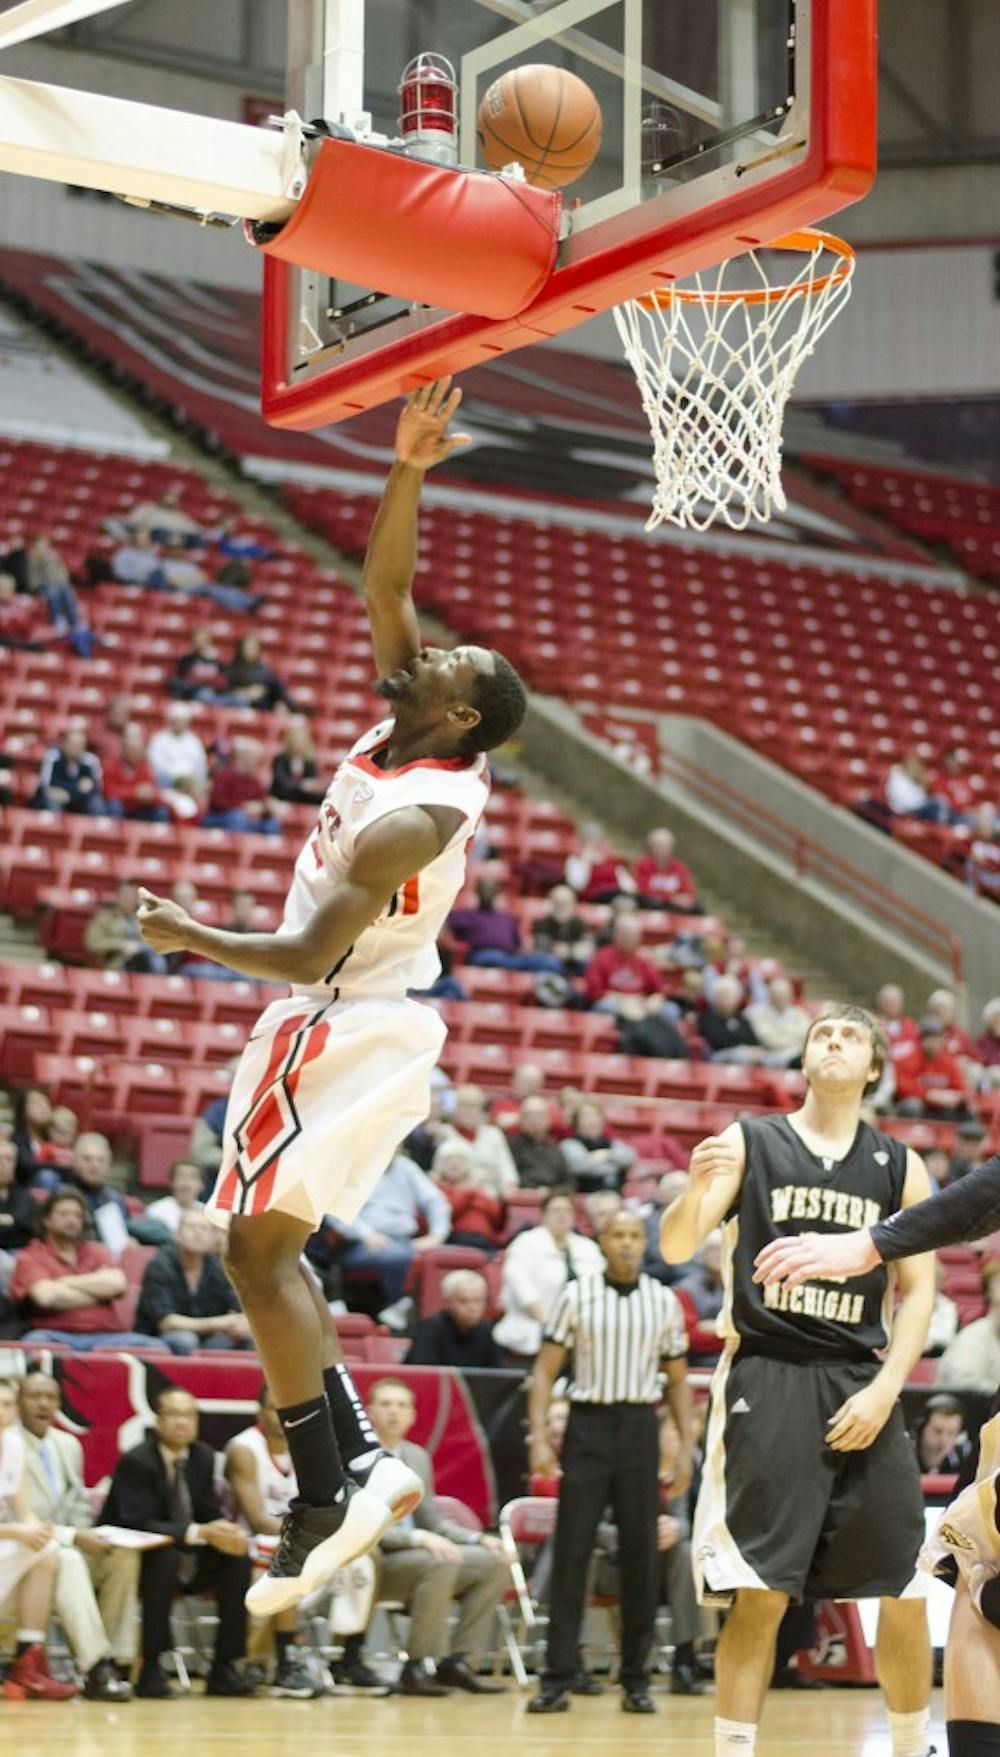 Senior forward Chris Bond attempts to get a basket in the game against Western Michigan on Feb. 26 at Worthen Arena. Bond scored 14 points. DN PHOTO BREANNA DAUGHERTY 